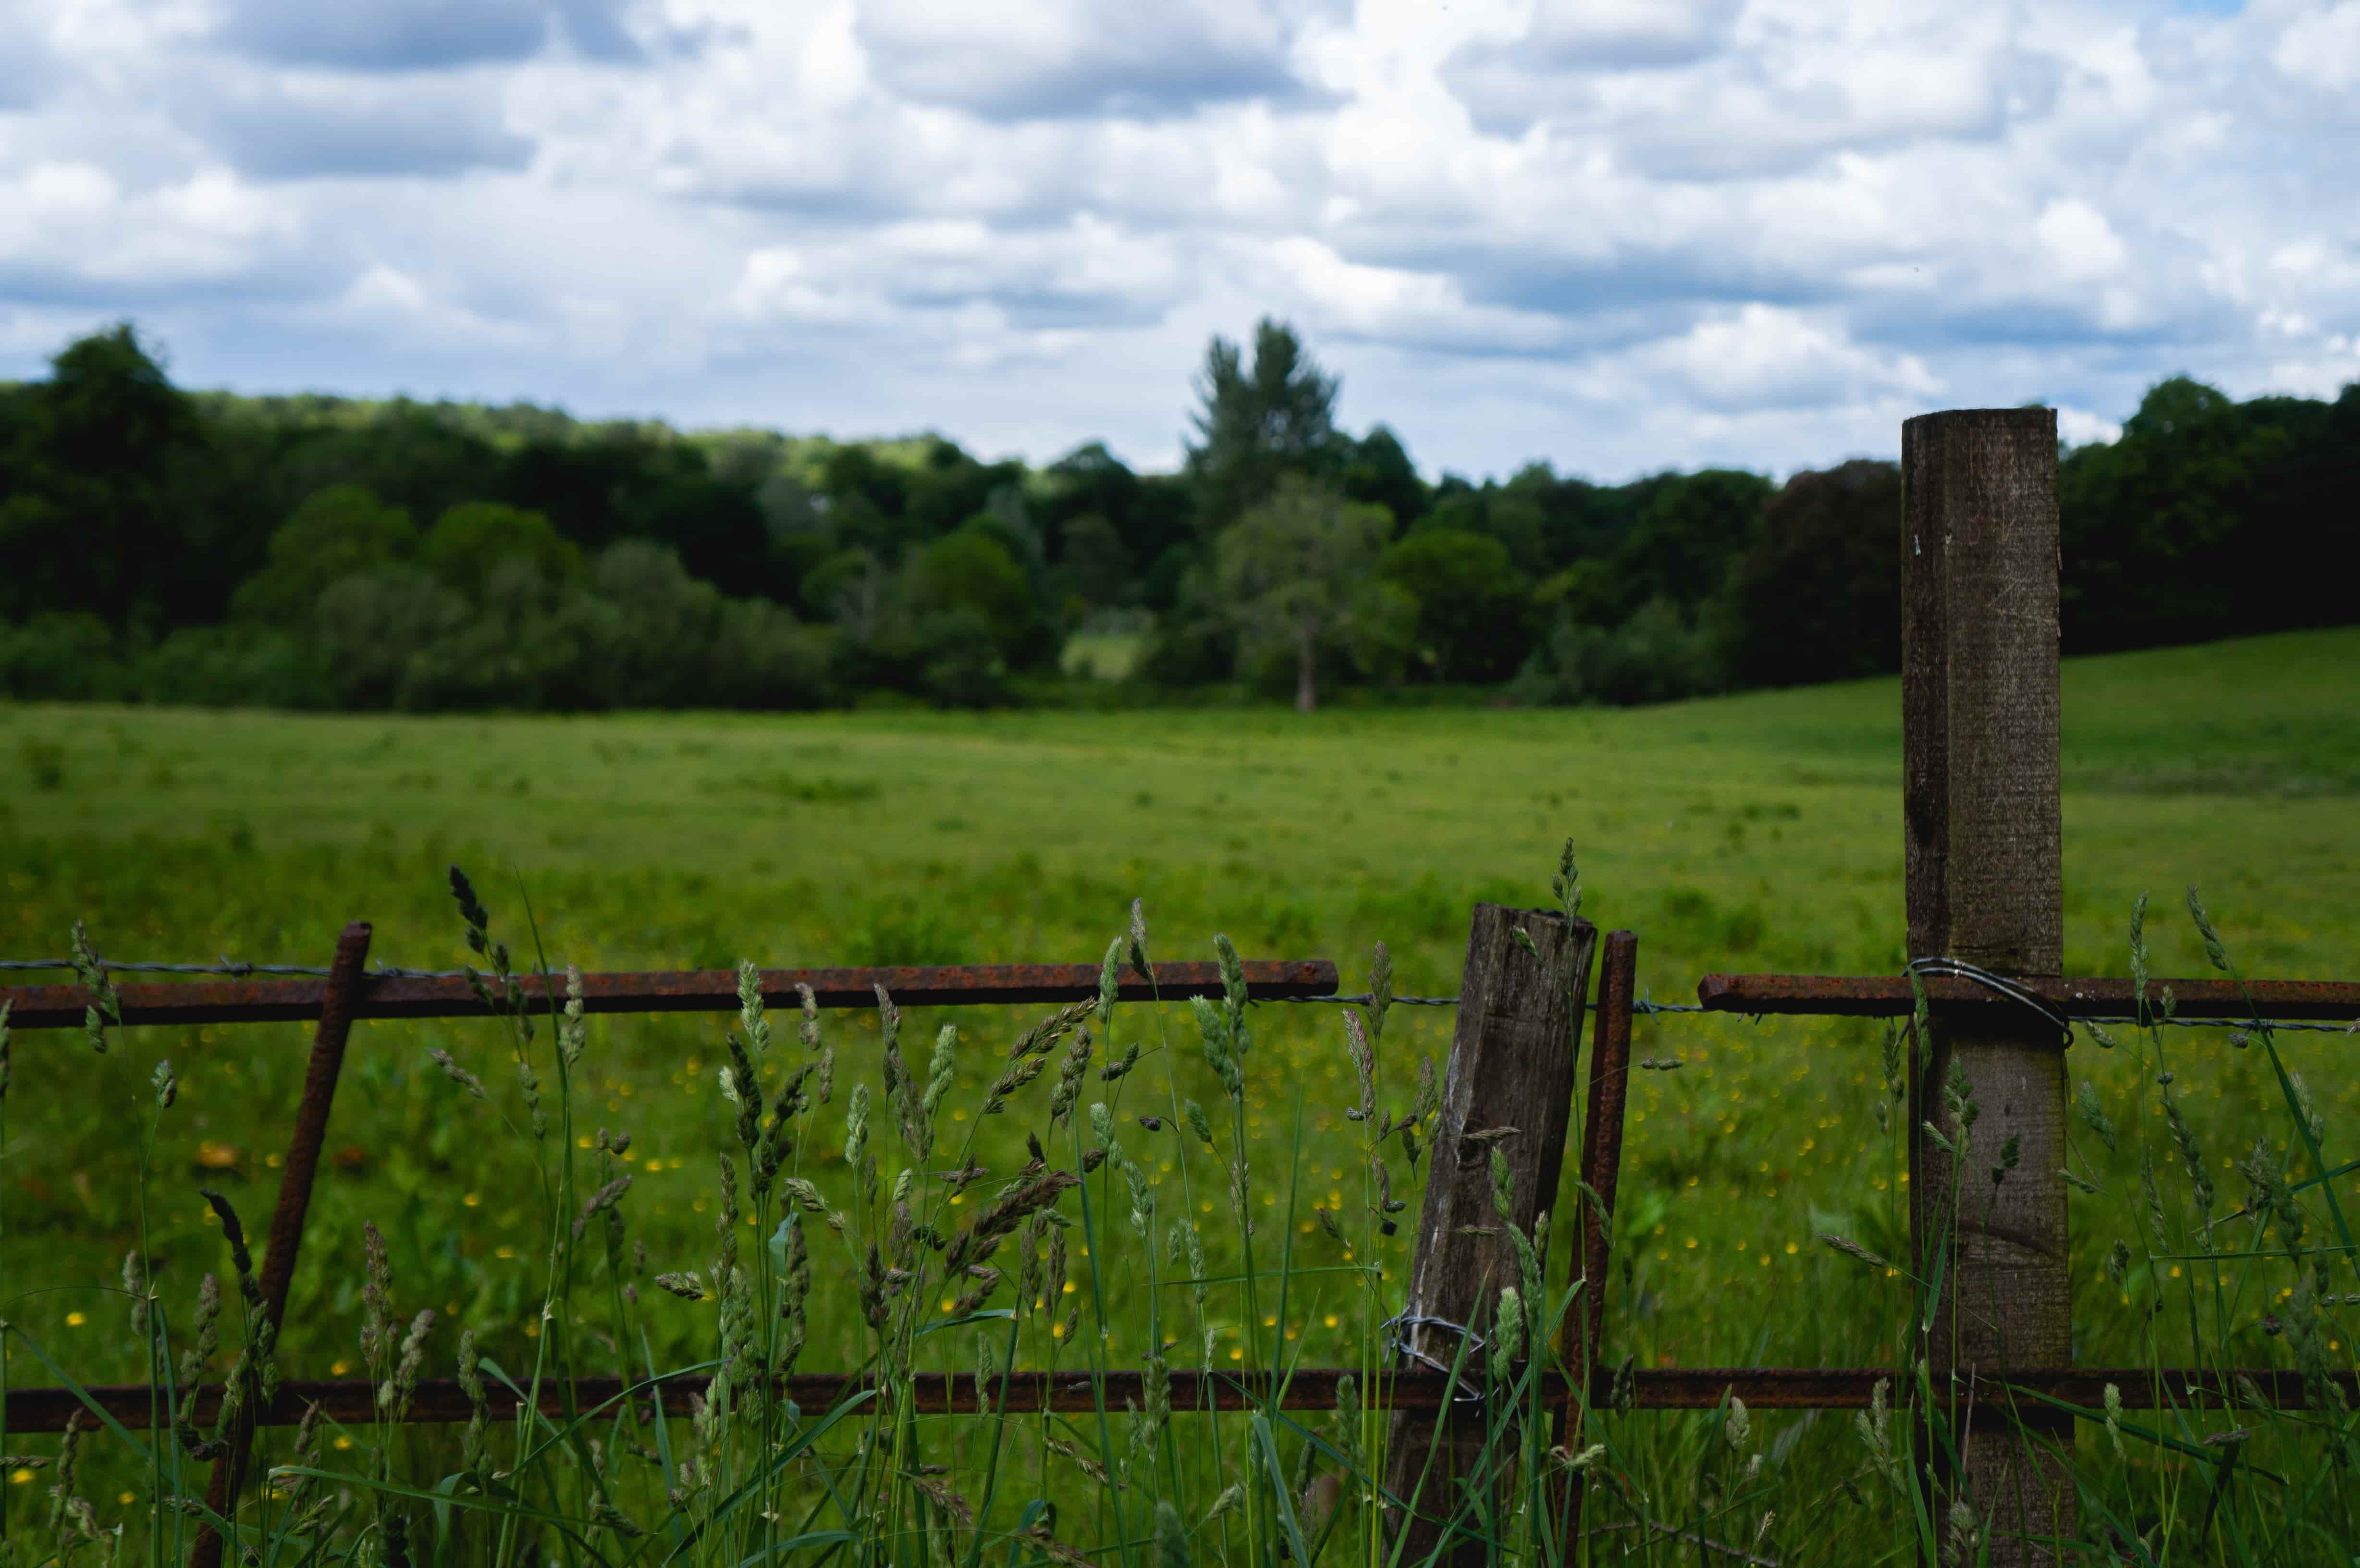 A view of an empty green field on a cloudy day with a fence in the foreground.